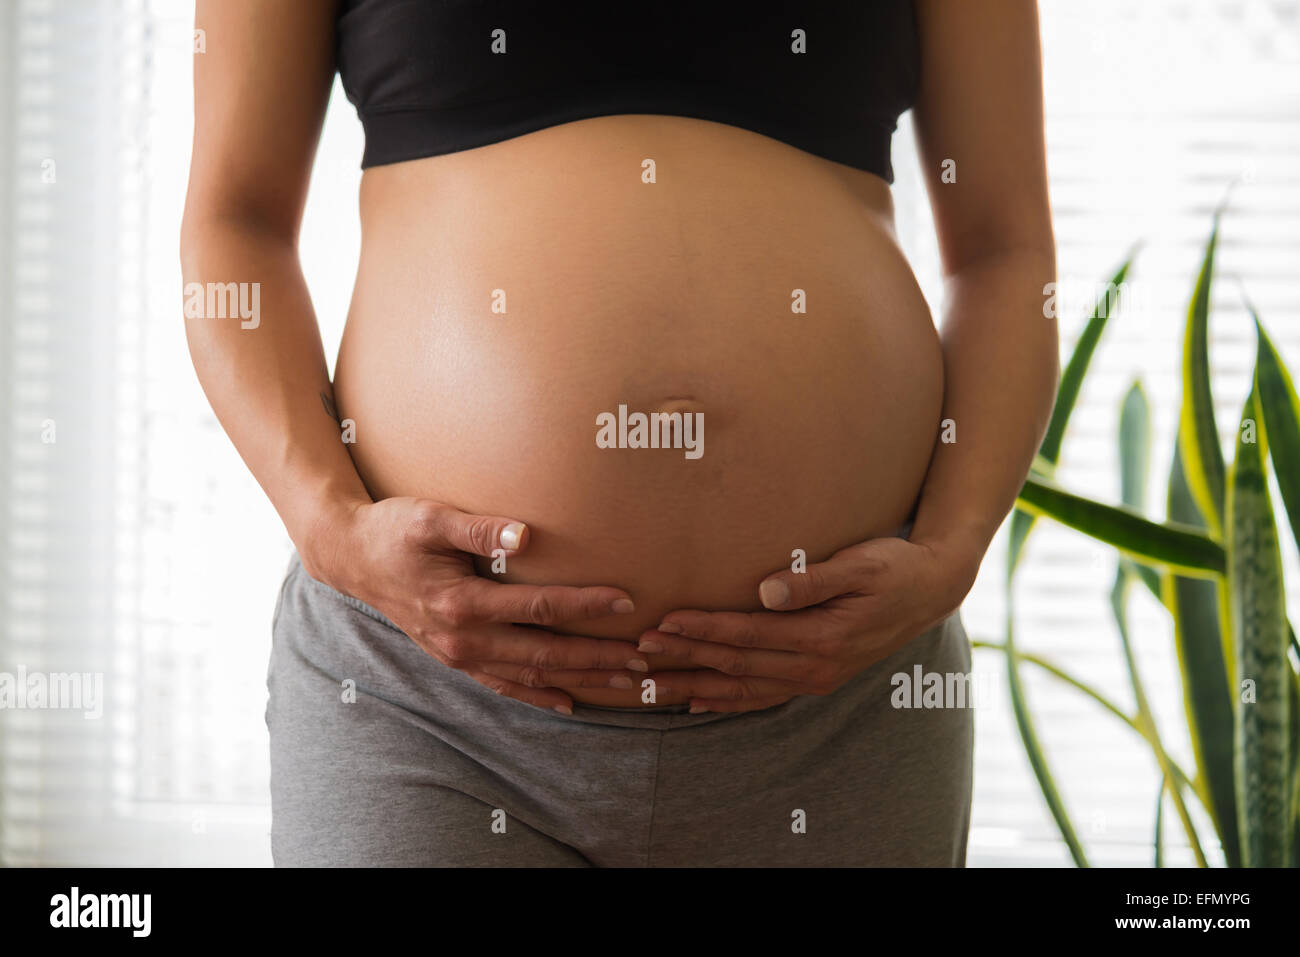 Baby bump, Image of 8 month pregnant woman holding her bump Stock Photo